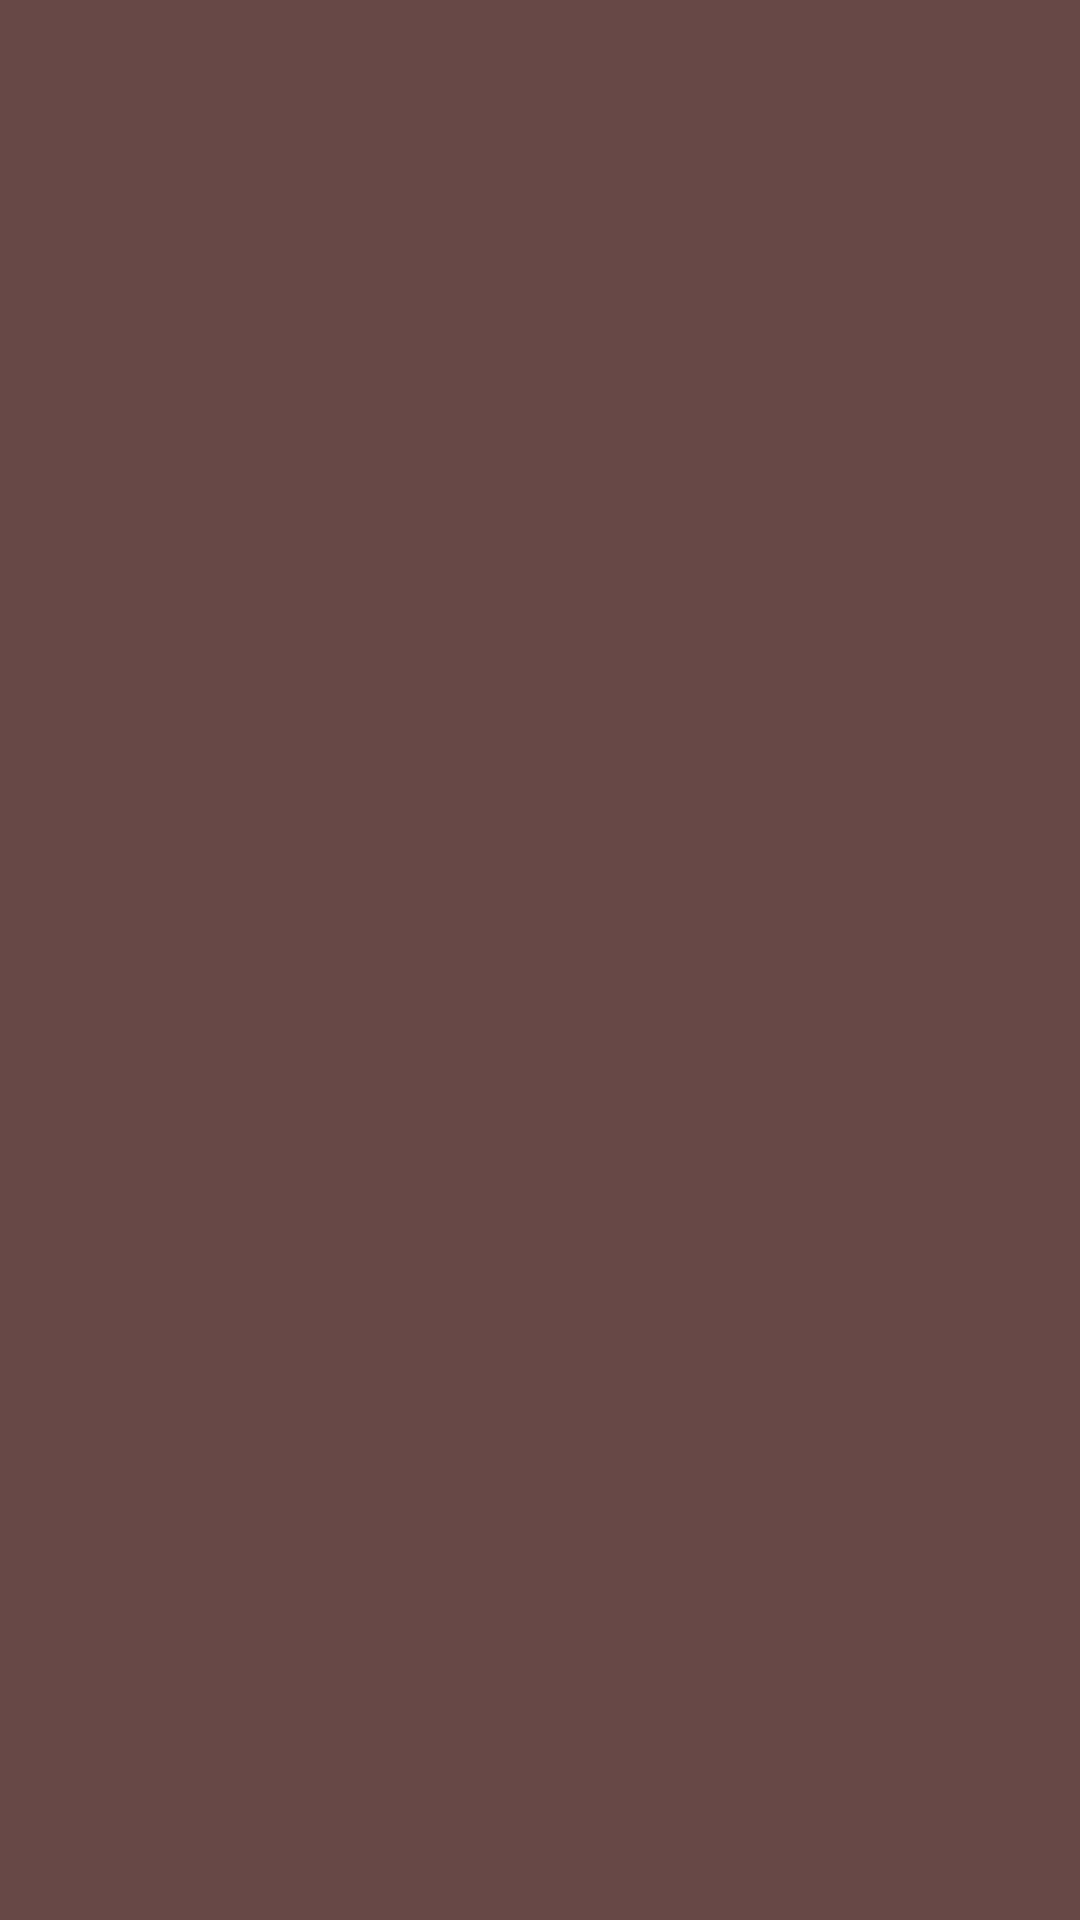 1080x1920 Rose Ebony Solid Color Background